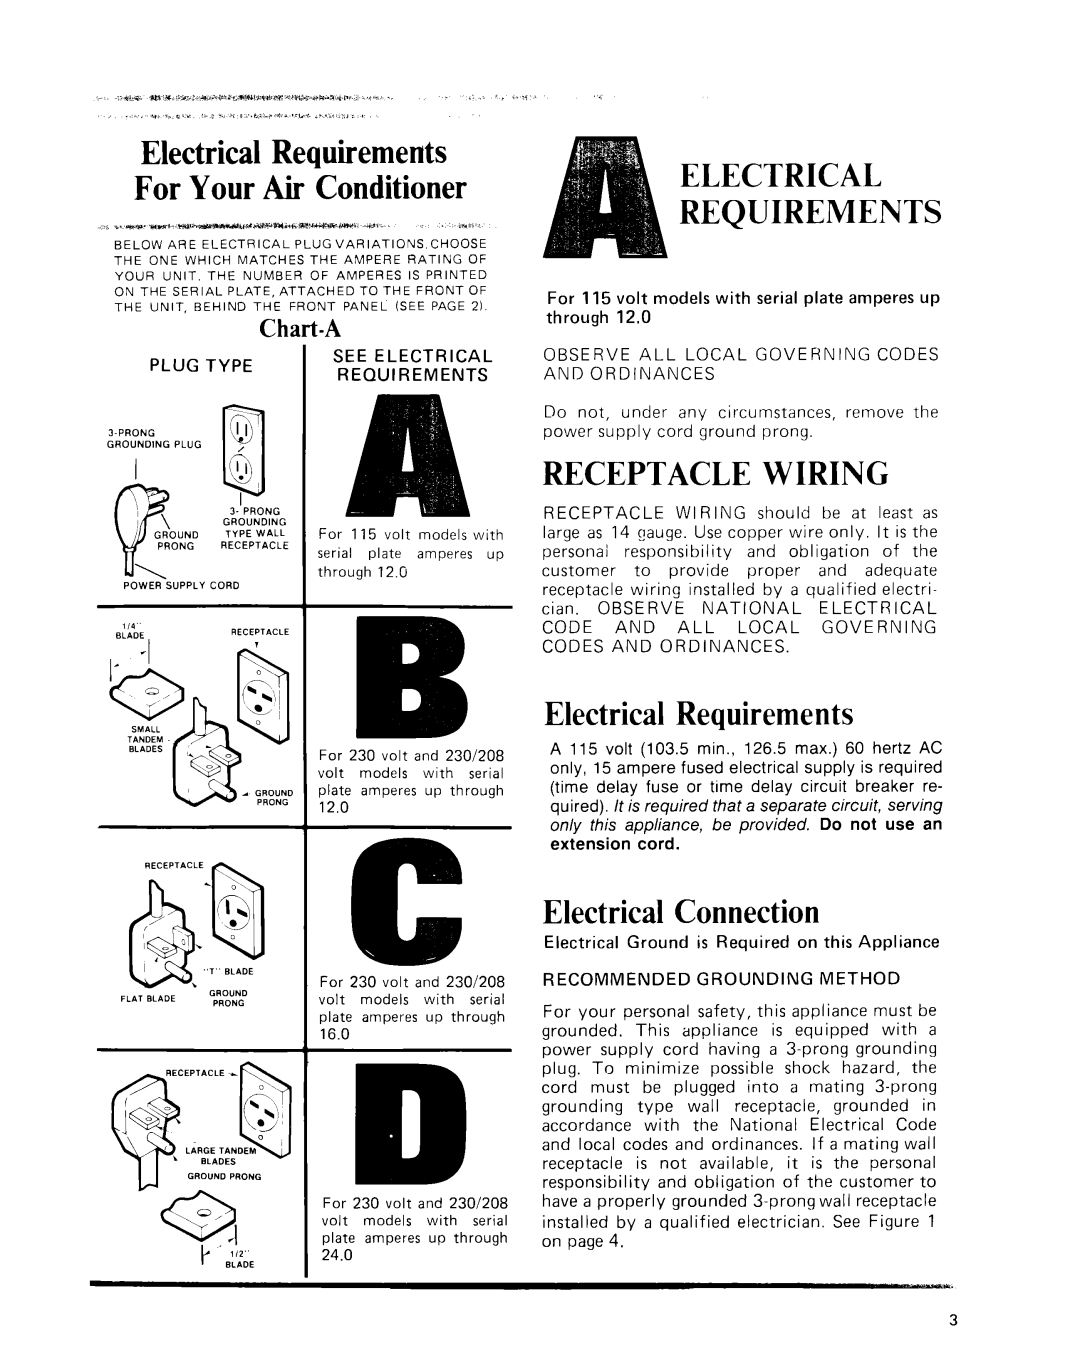 Whirlpool Air Conditioner manual Electrical Requirements, Receptacle Wiring, Electrical Connection, Chart-A 